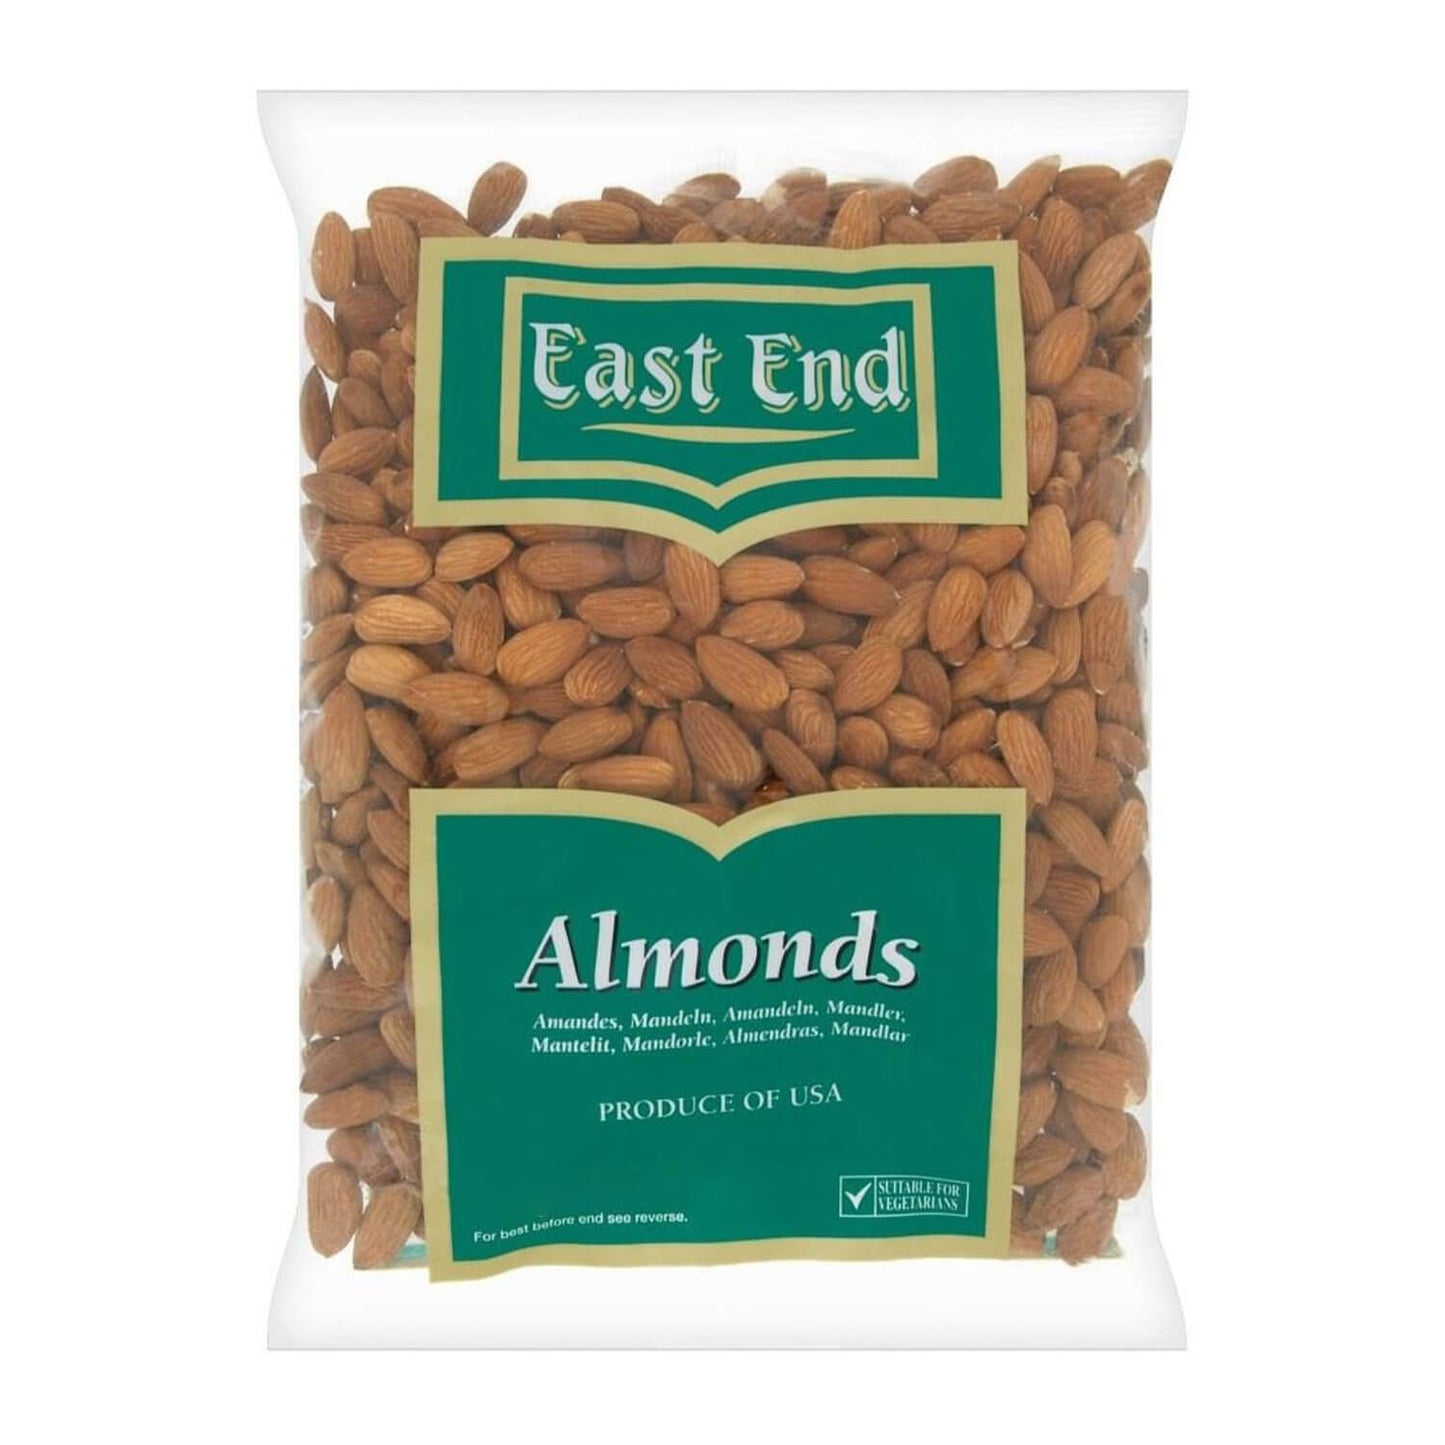 East End Almonds